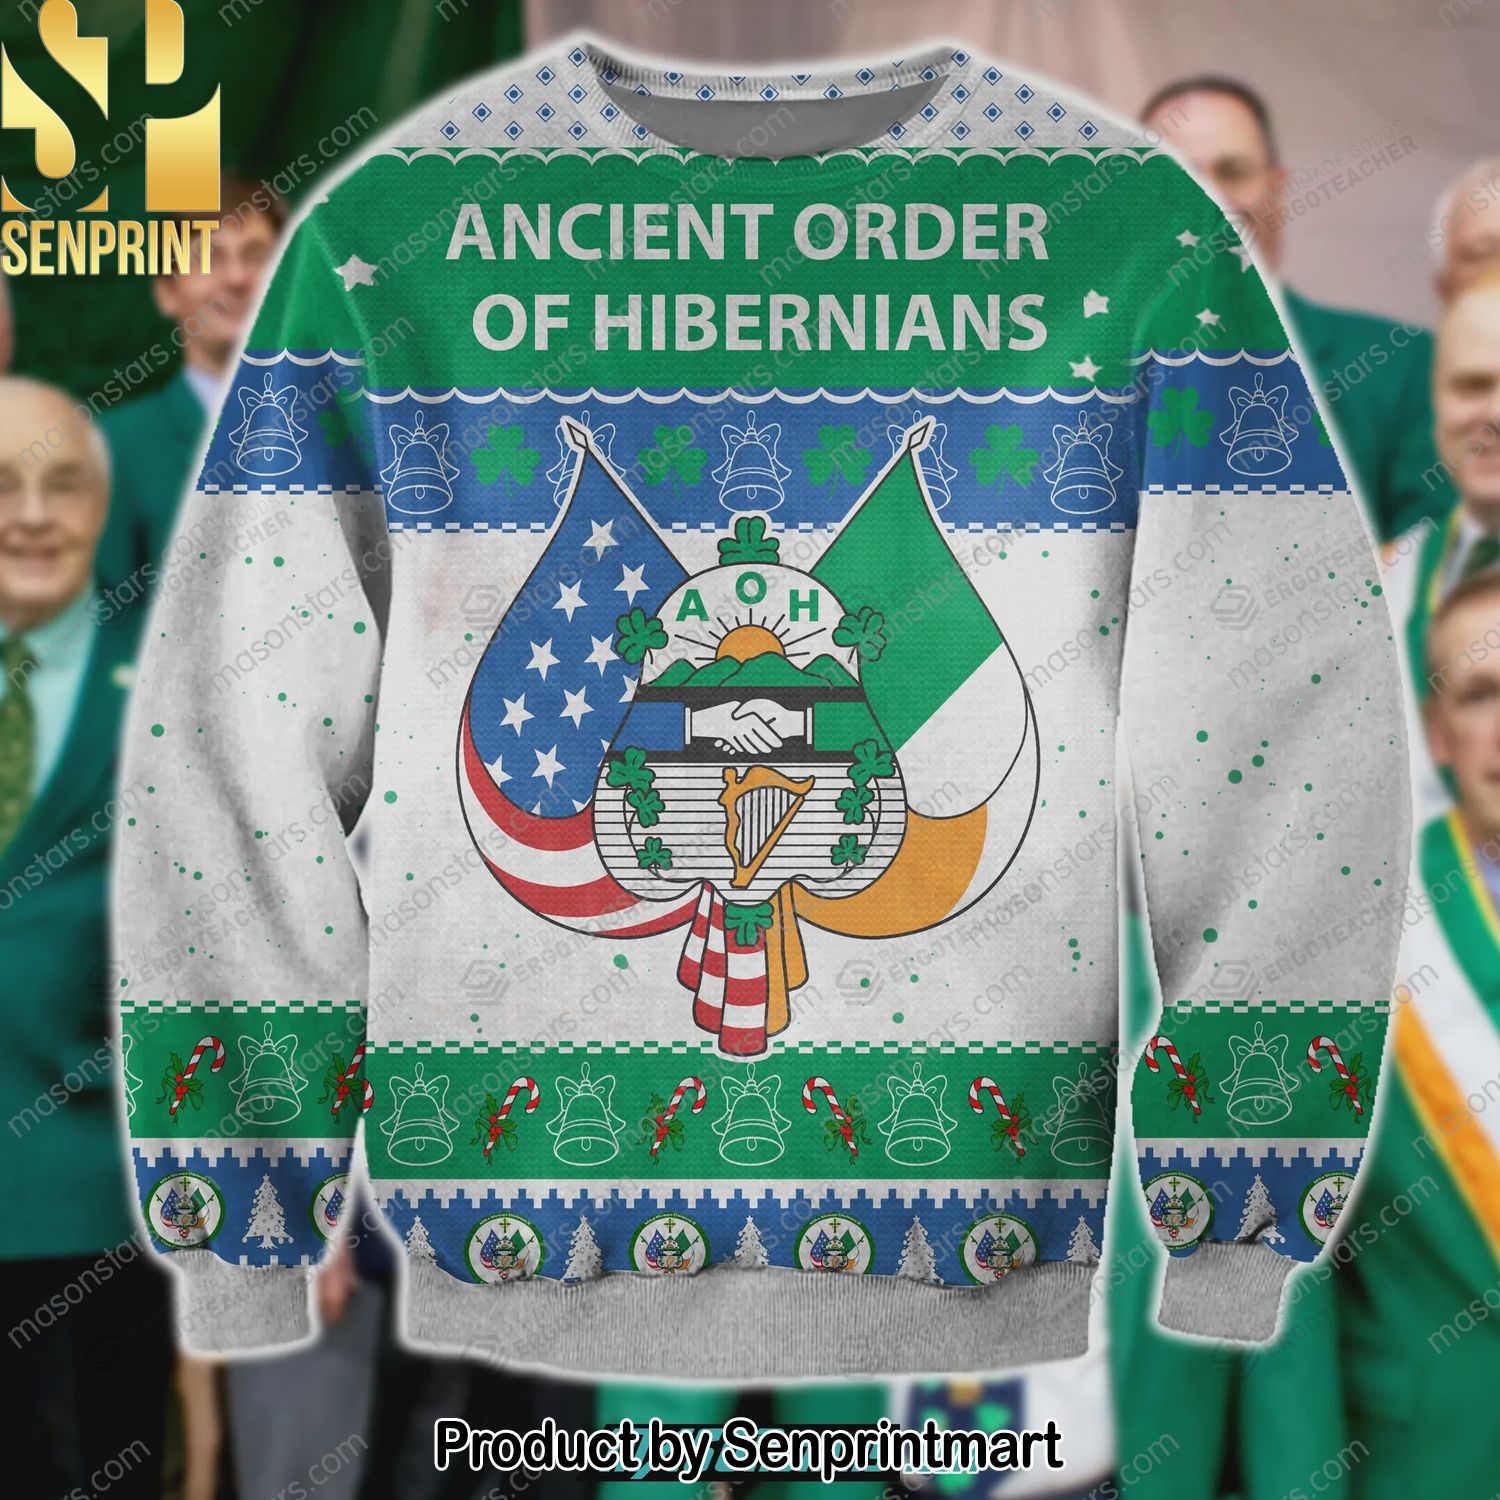 Ancient Order of Hibernians Knitting Pattern Ugly Christmas Holiday Sweater